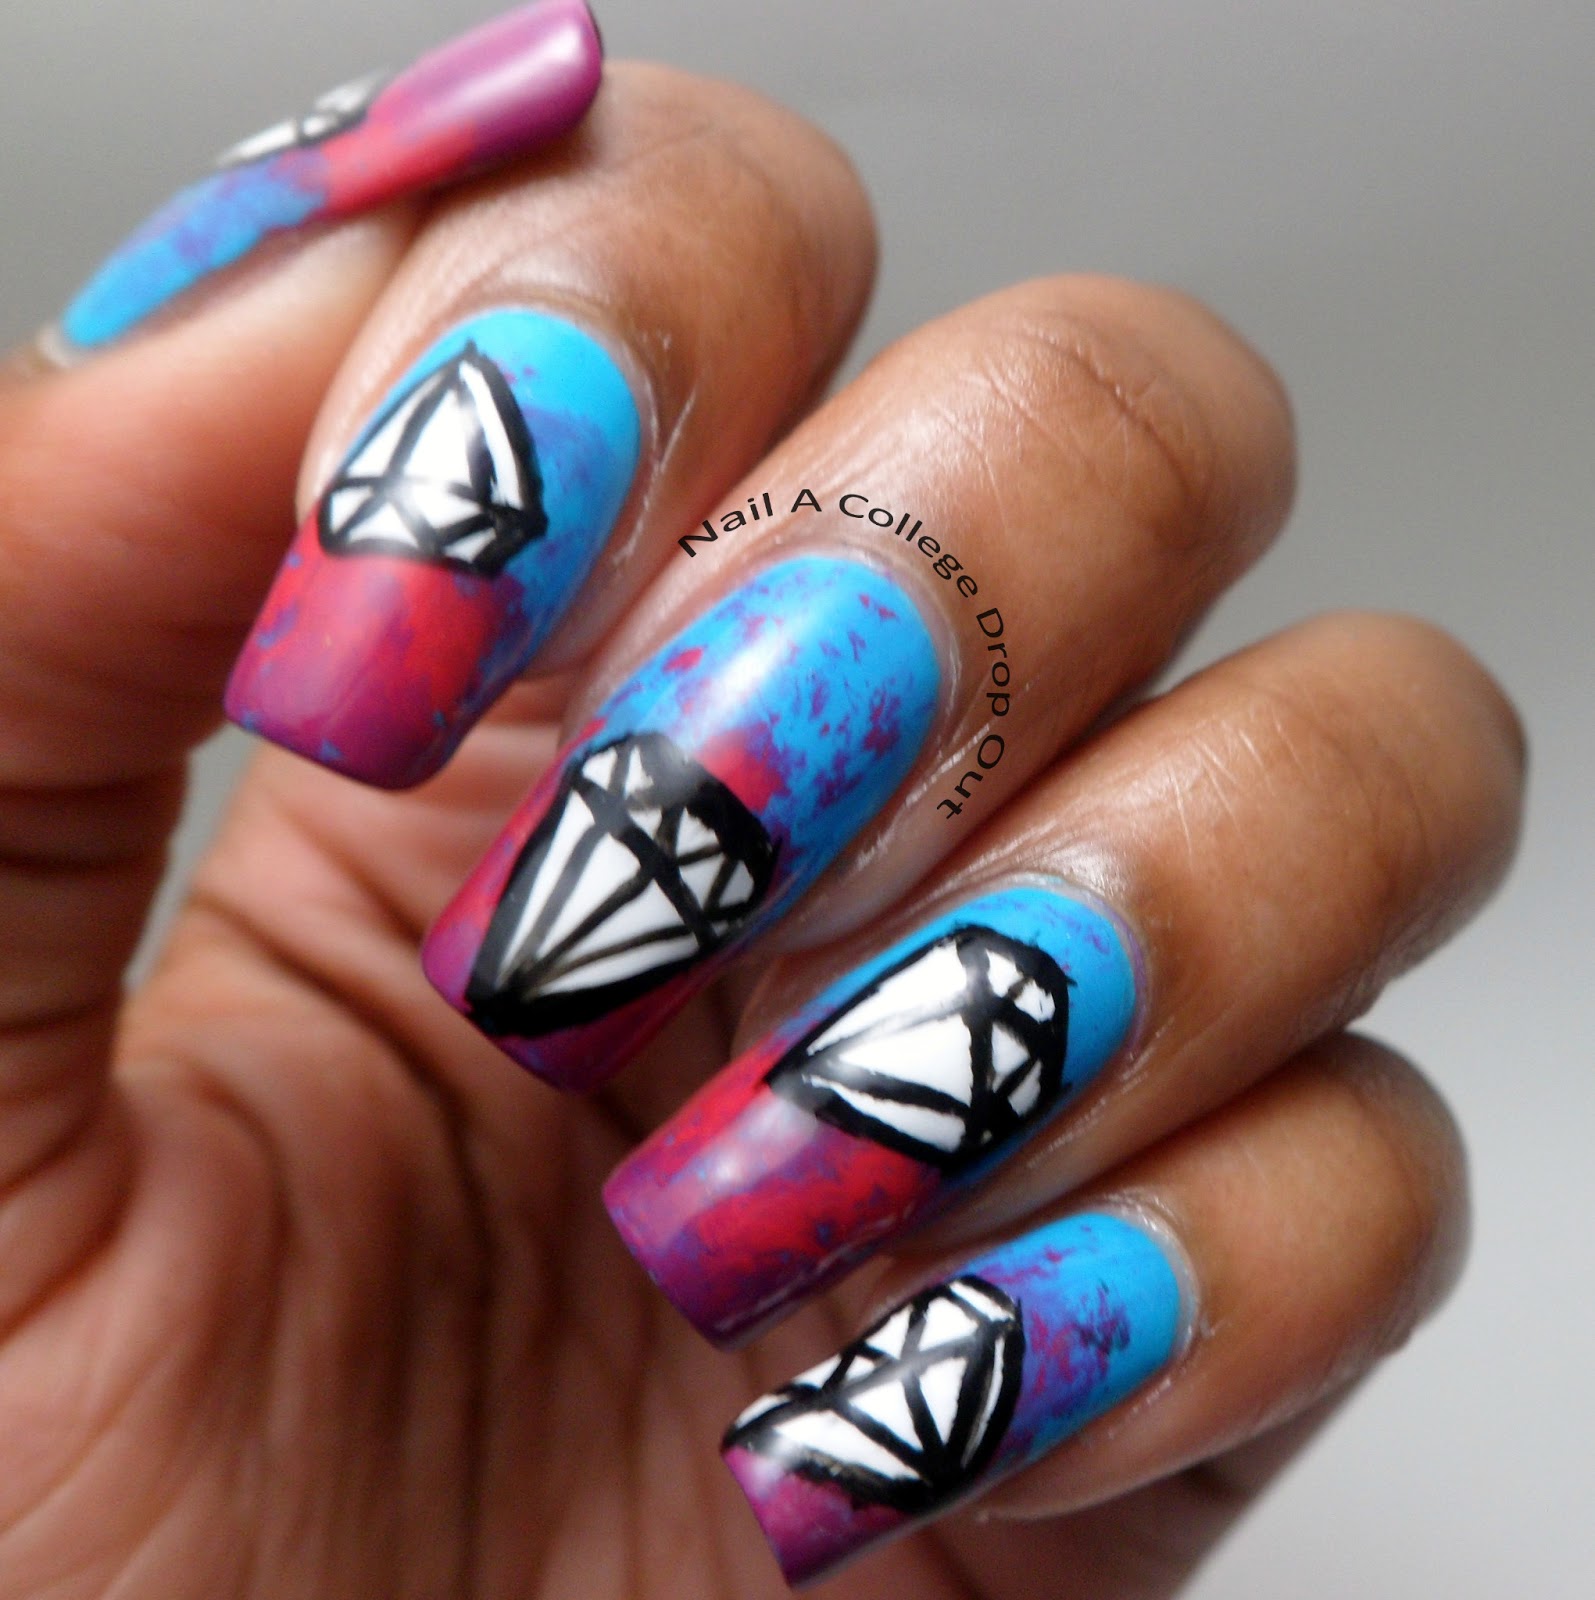 Nail Art Designs With Diamonds Now for the nail art!